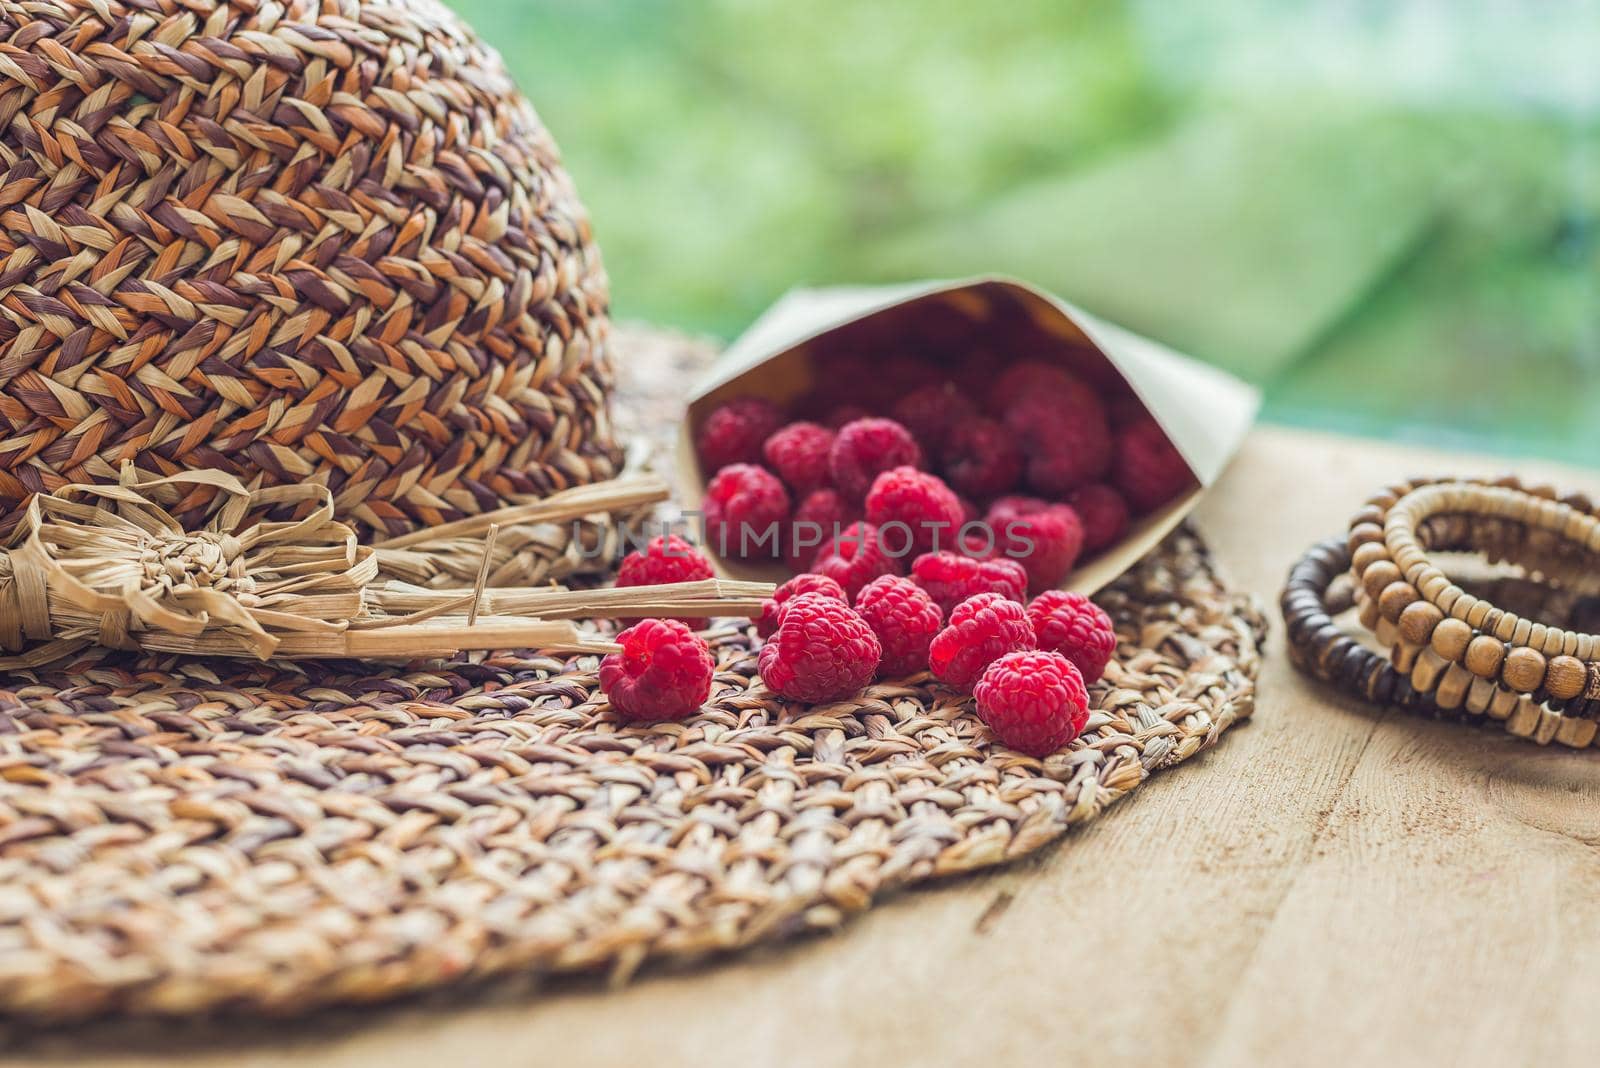 Summer holiday, vacation, relaxation concept. Raspberries, straw hat, on wooden background. Free text copy space. Summer vibes concept